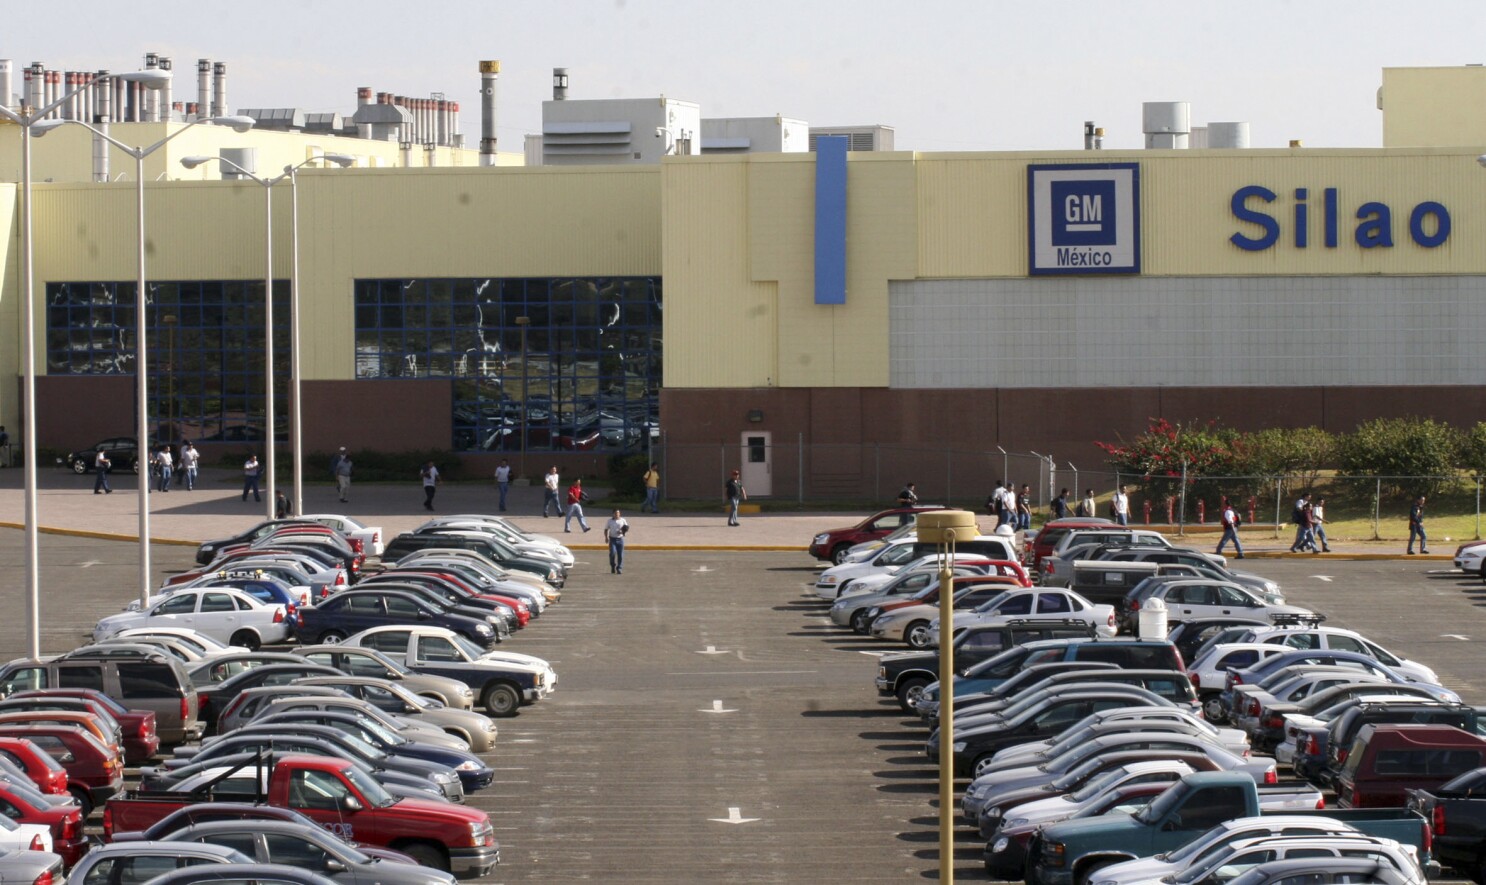 GM Silao reaches agreement with workers